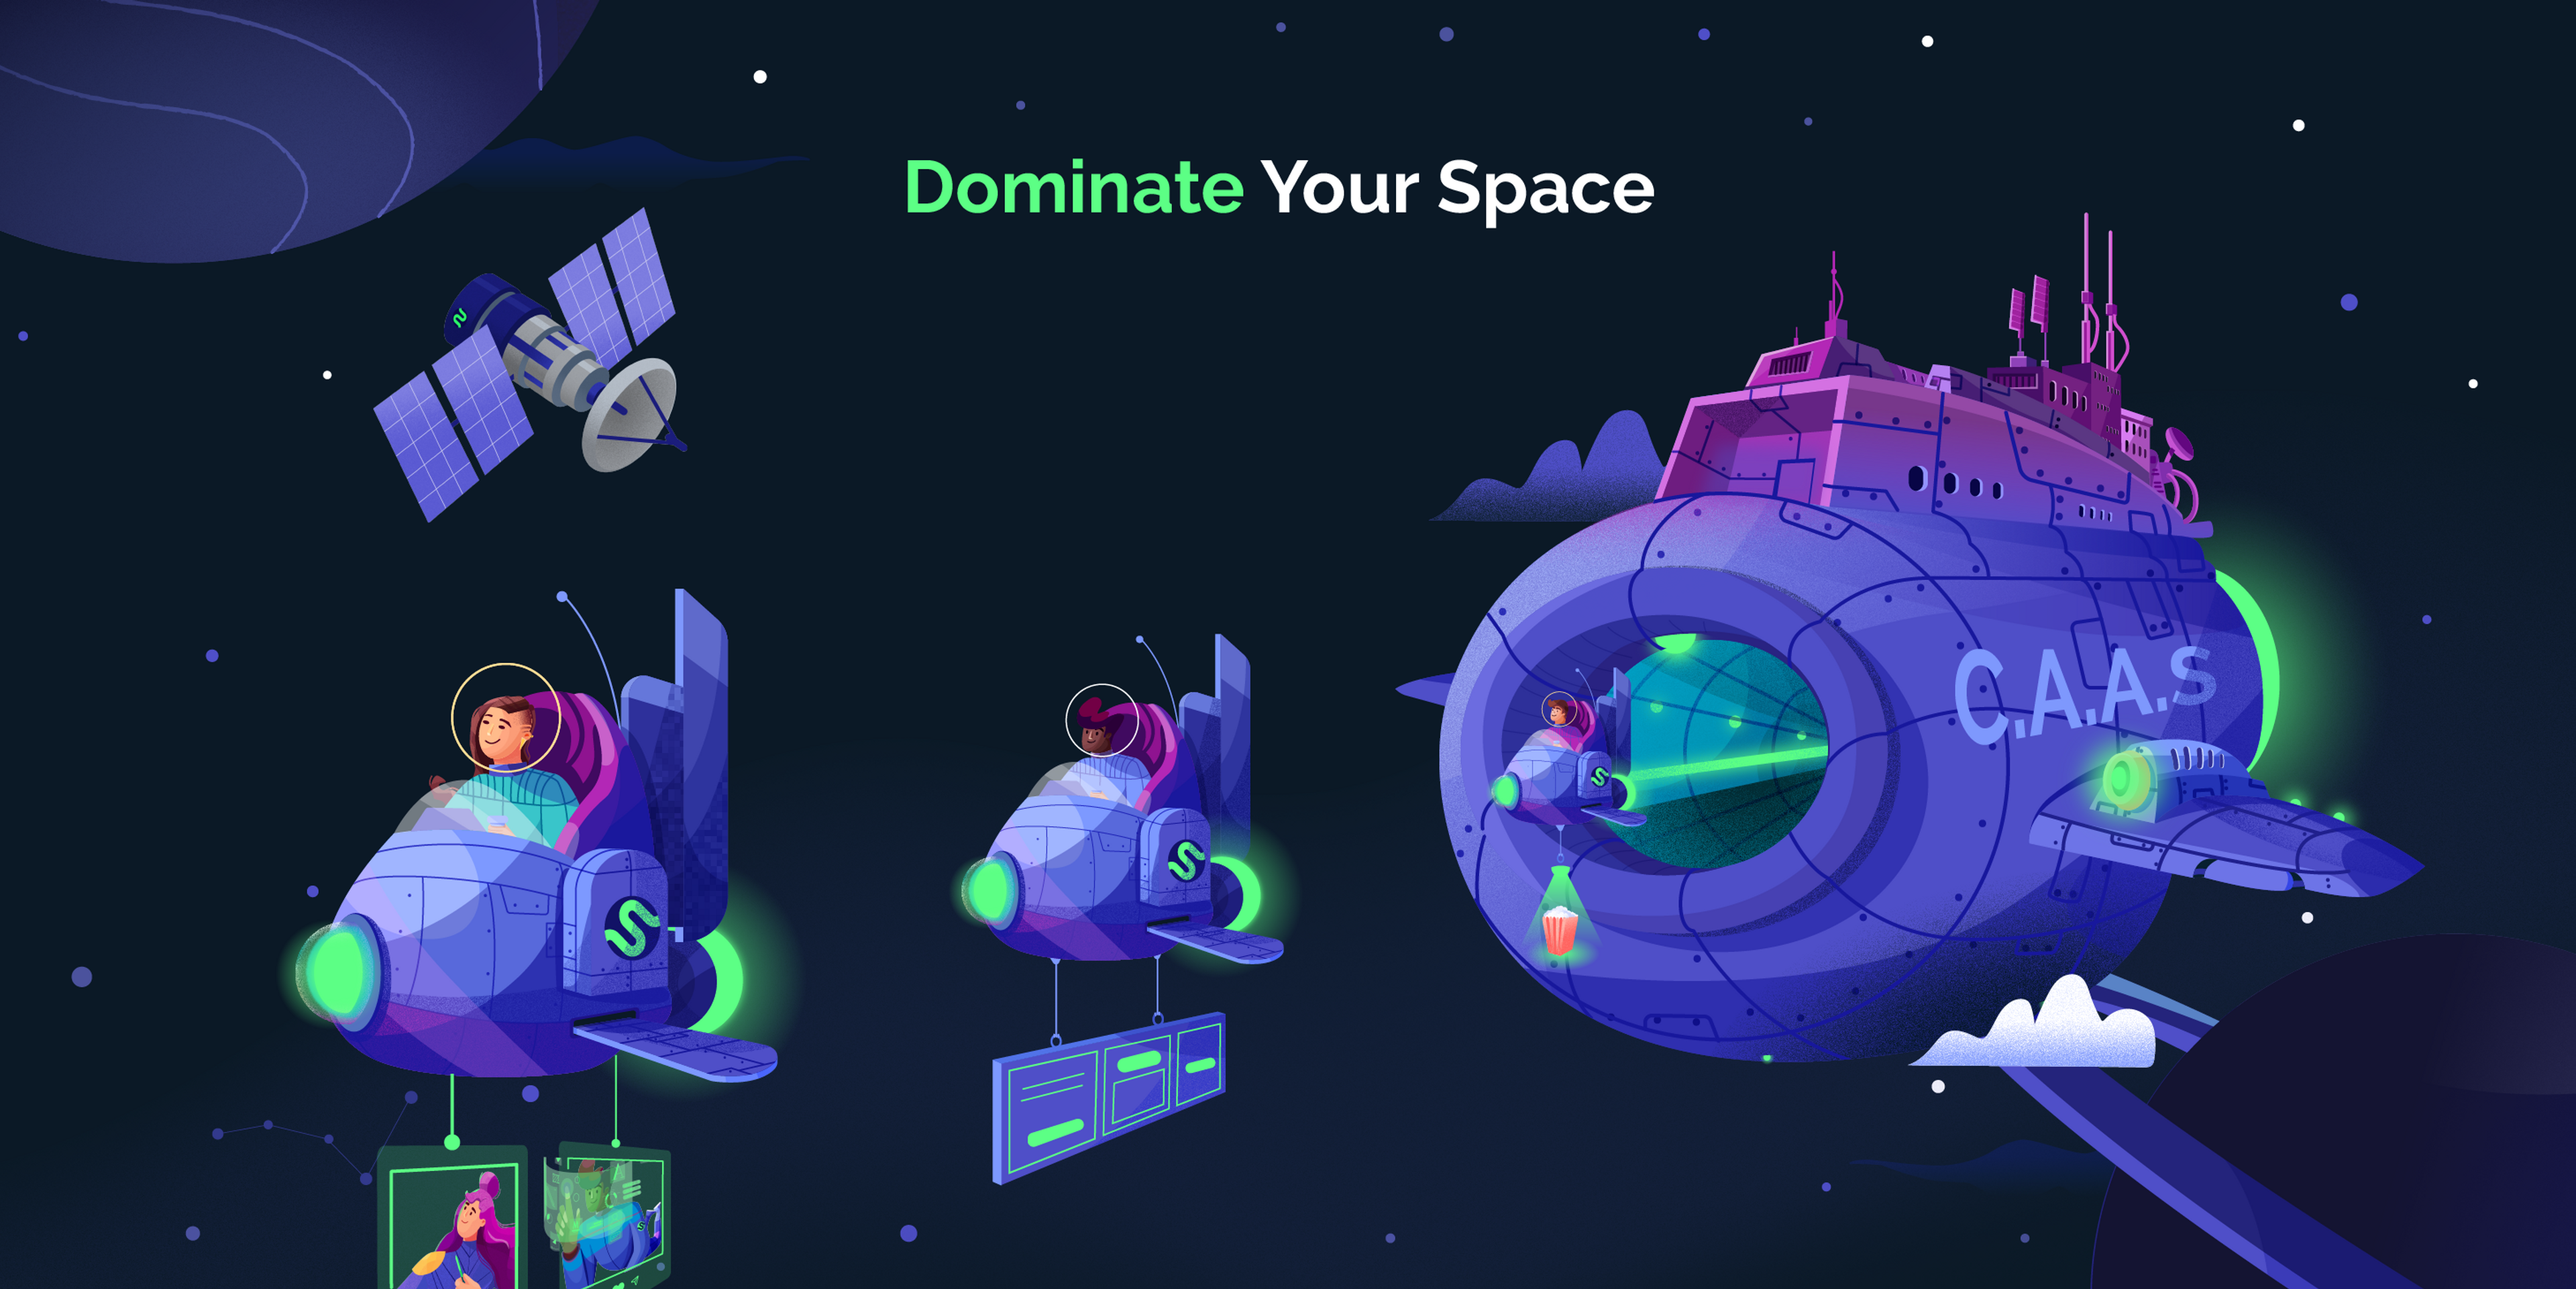 An image that shows CaaS as a space station that lets you dominate your marketing space by scaling your creative. 